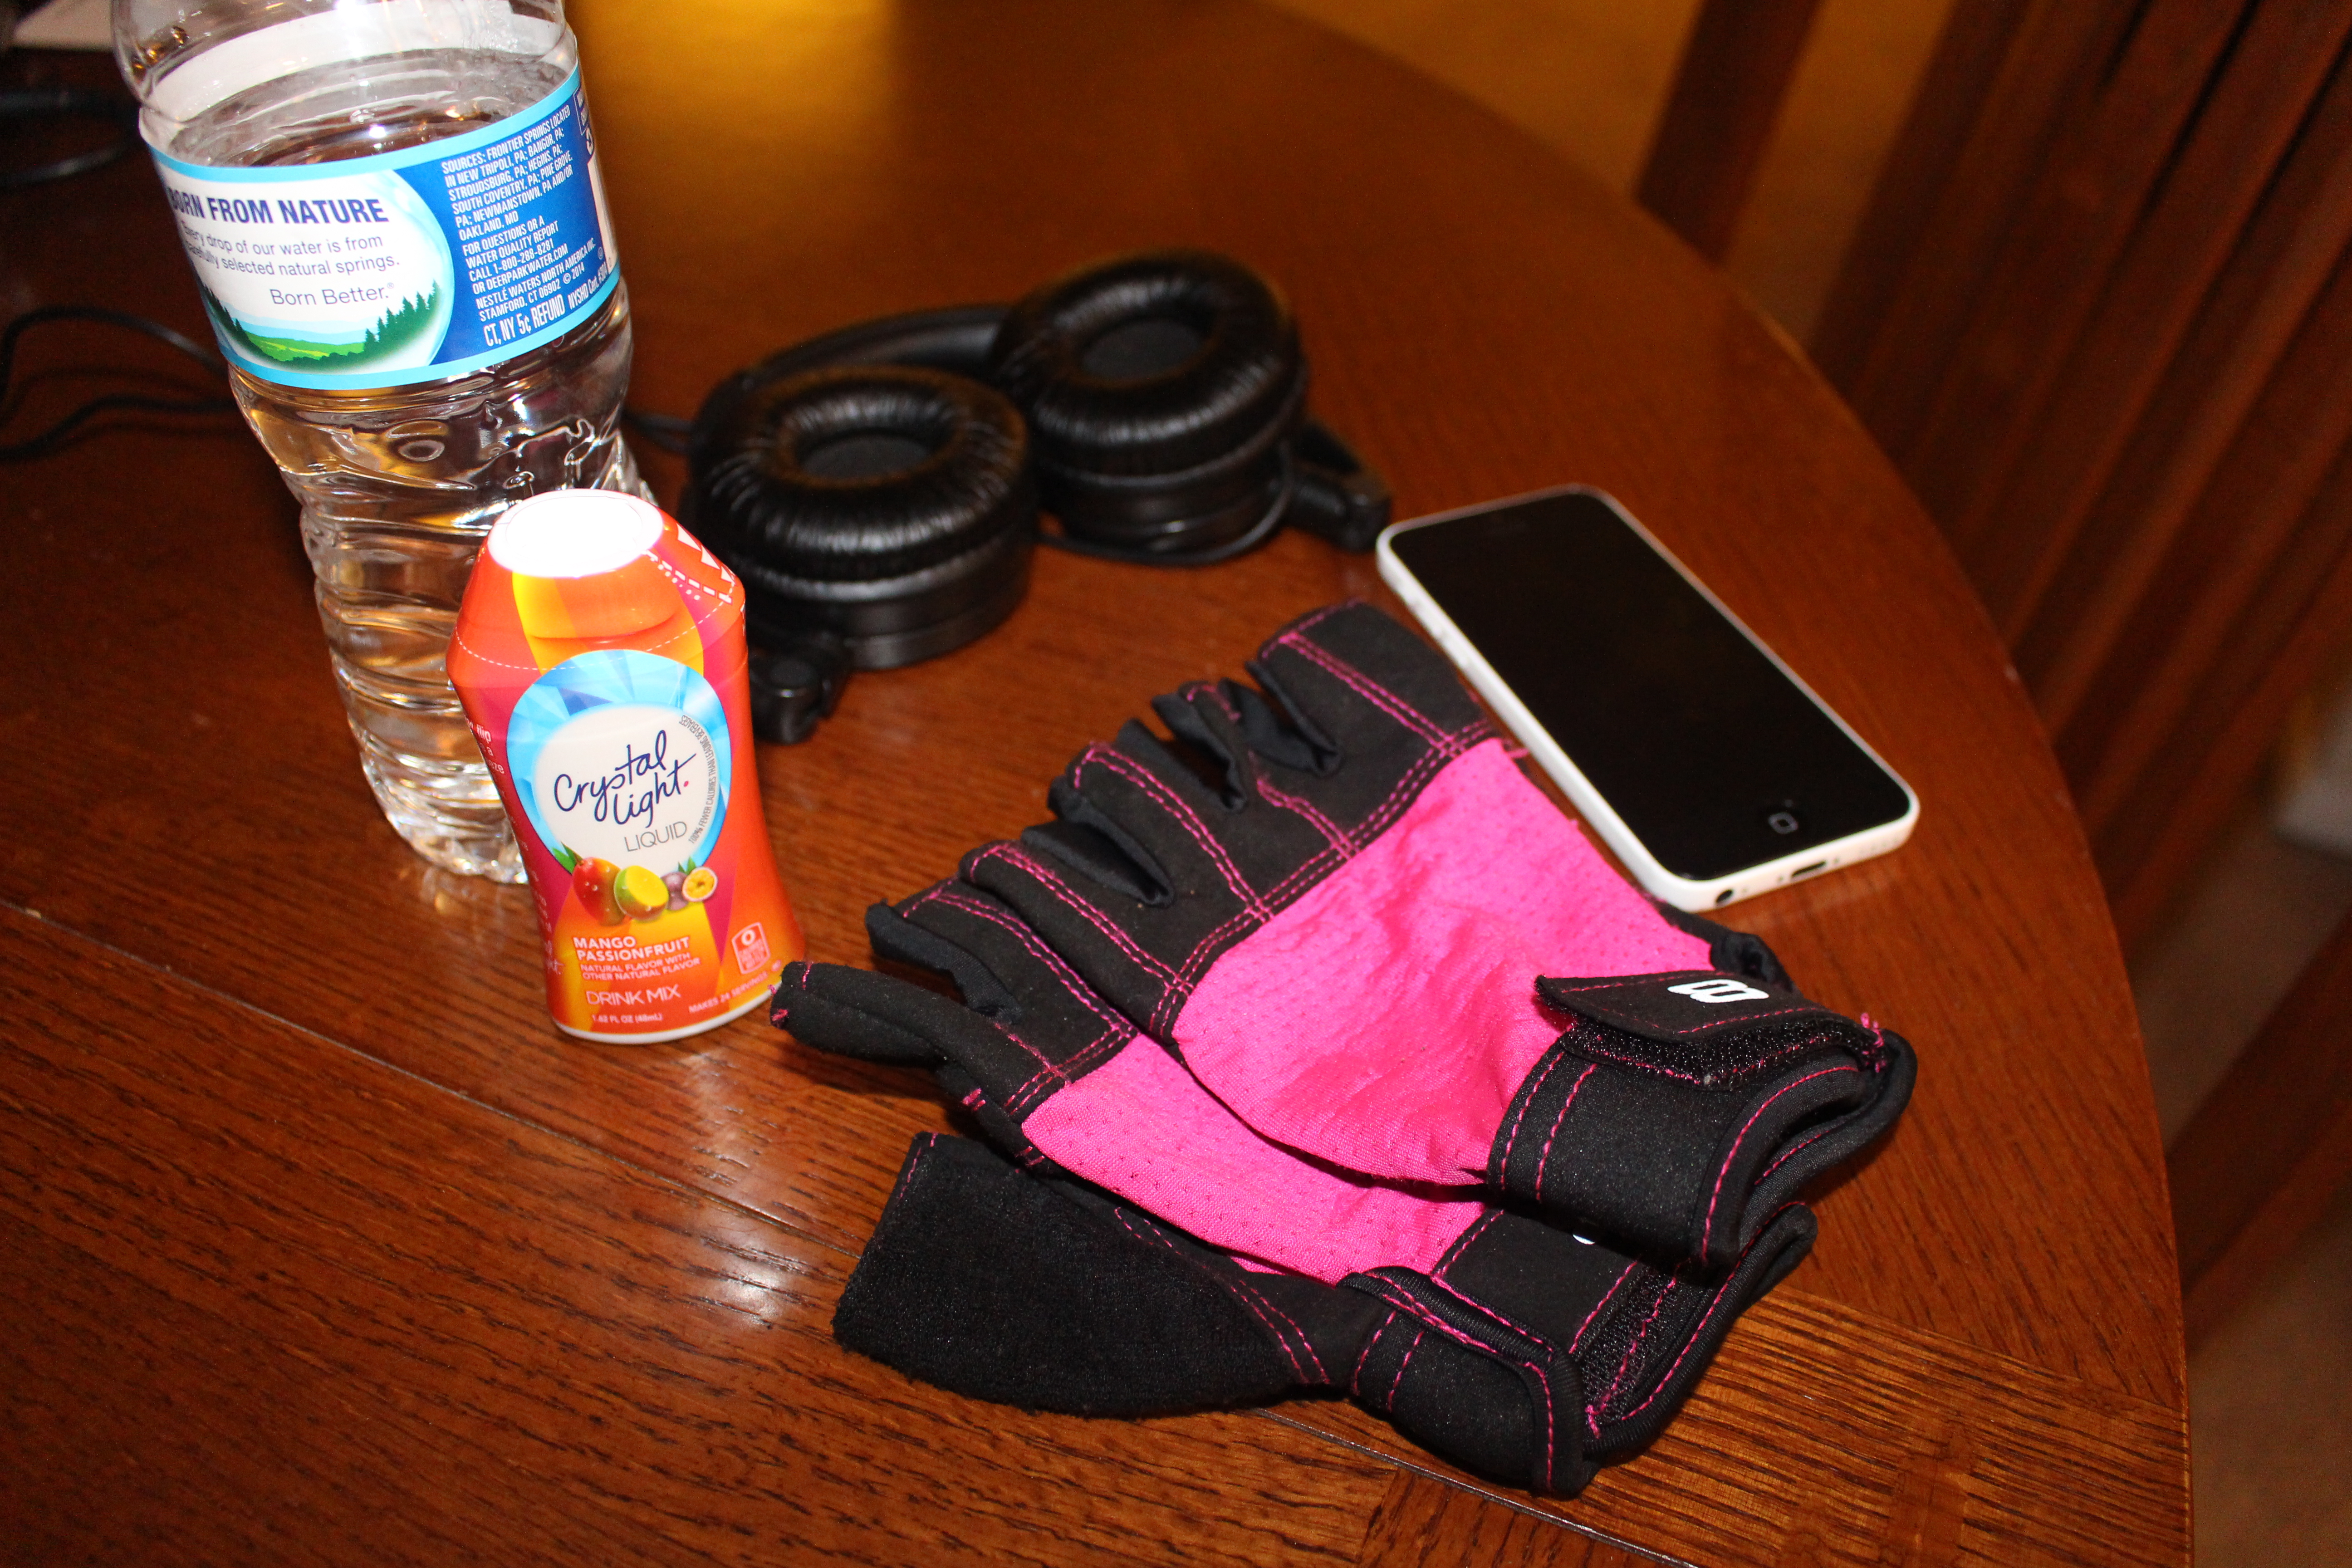 Crystal Light Low Calorie Drinks in Walmart Stores, gym essentials like headphones, iPhone and weight gloves